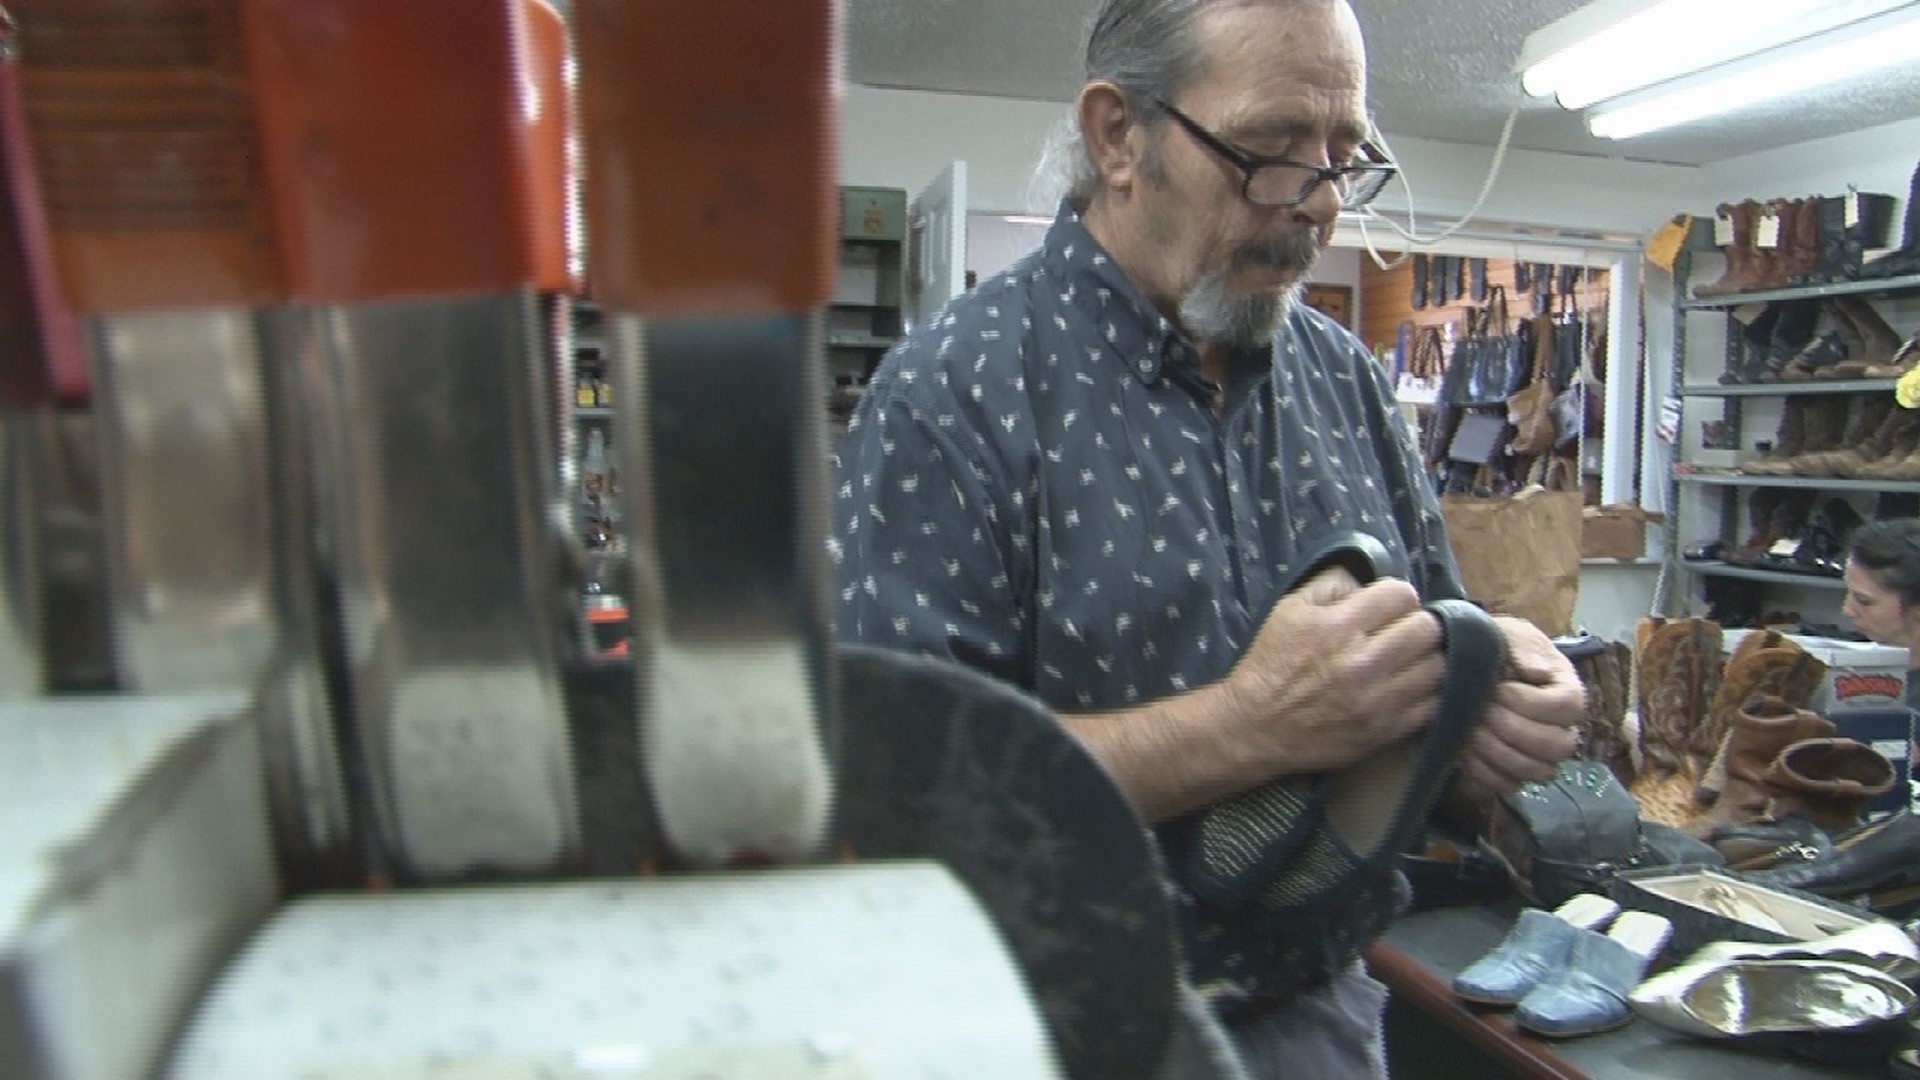 A Sevierville man runs one of the last shoe repair businesses in the area. And after 40 years is looking for someone to fill his shoes.